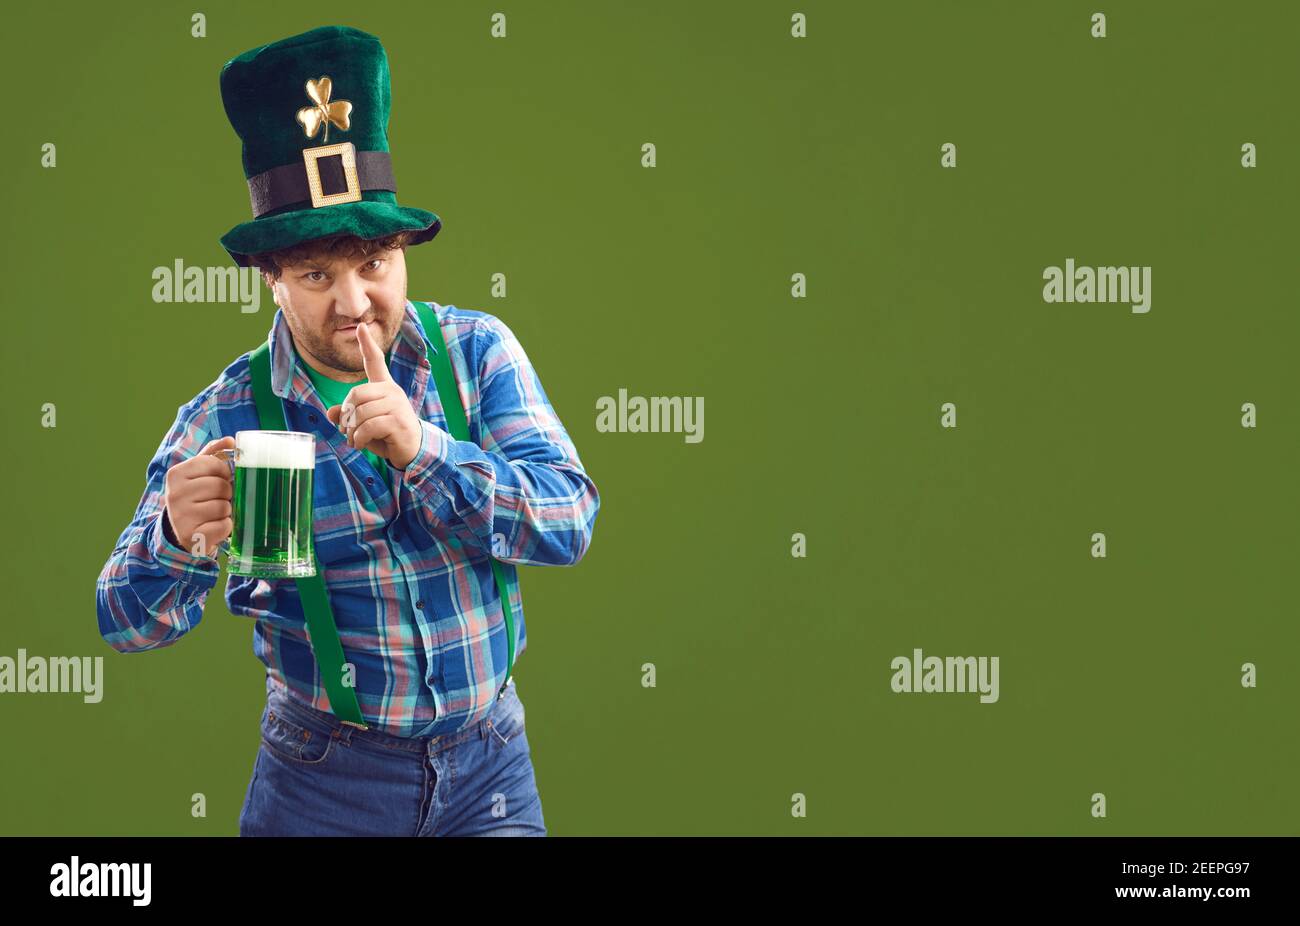 Positive man standing with green beer and showing silence sign for Patrick day Stock Photo